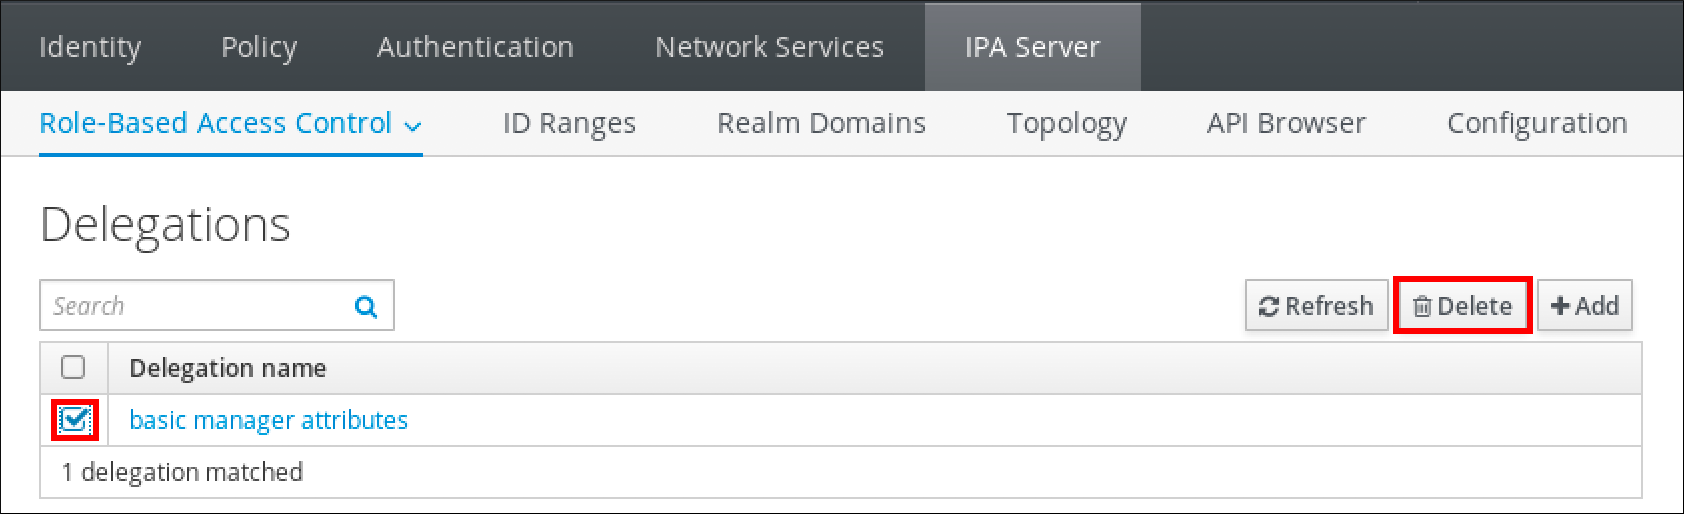 Screenshot of the "Role-Based Access Control" submenu of the "IPA Server" tab. The "Delegations" page displays a table with Delegation names and the checkbox for the "basic manager attributes" entry has been checked. The "Delete" button has been highlighted.